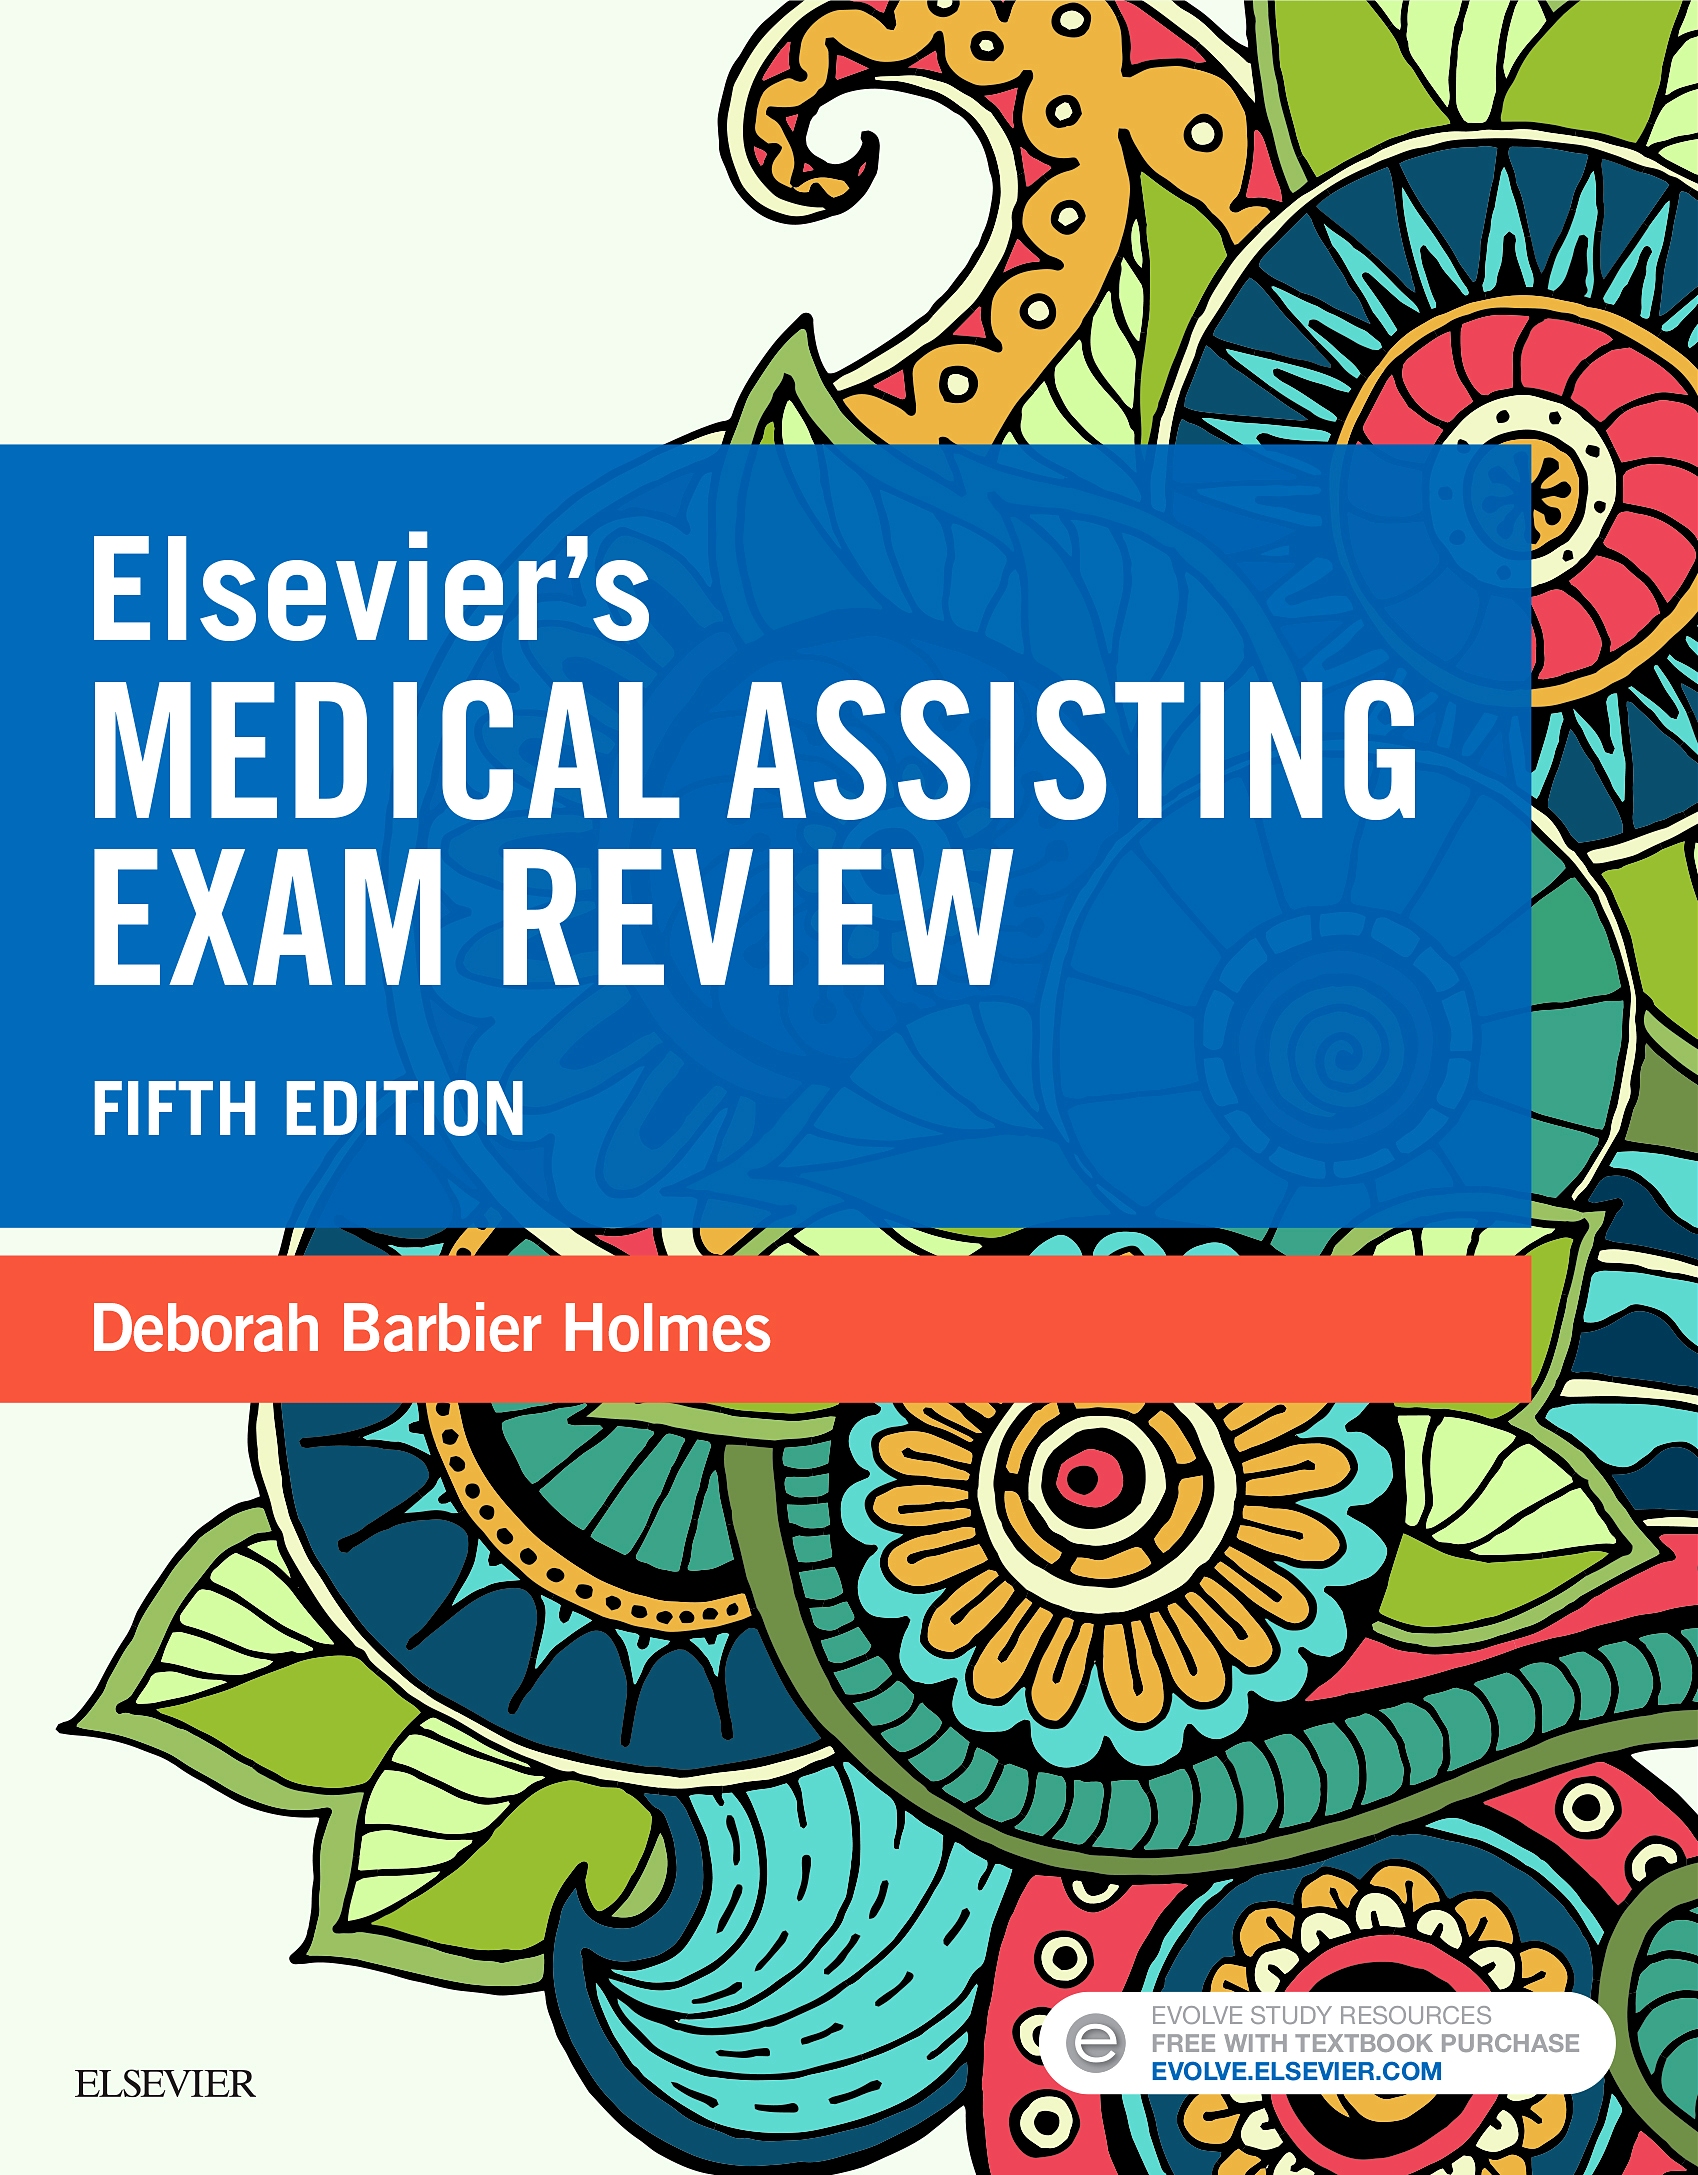 Evolve Resources for Elsevier's Medical Assisting Exam Review, 5th Edition